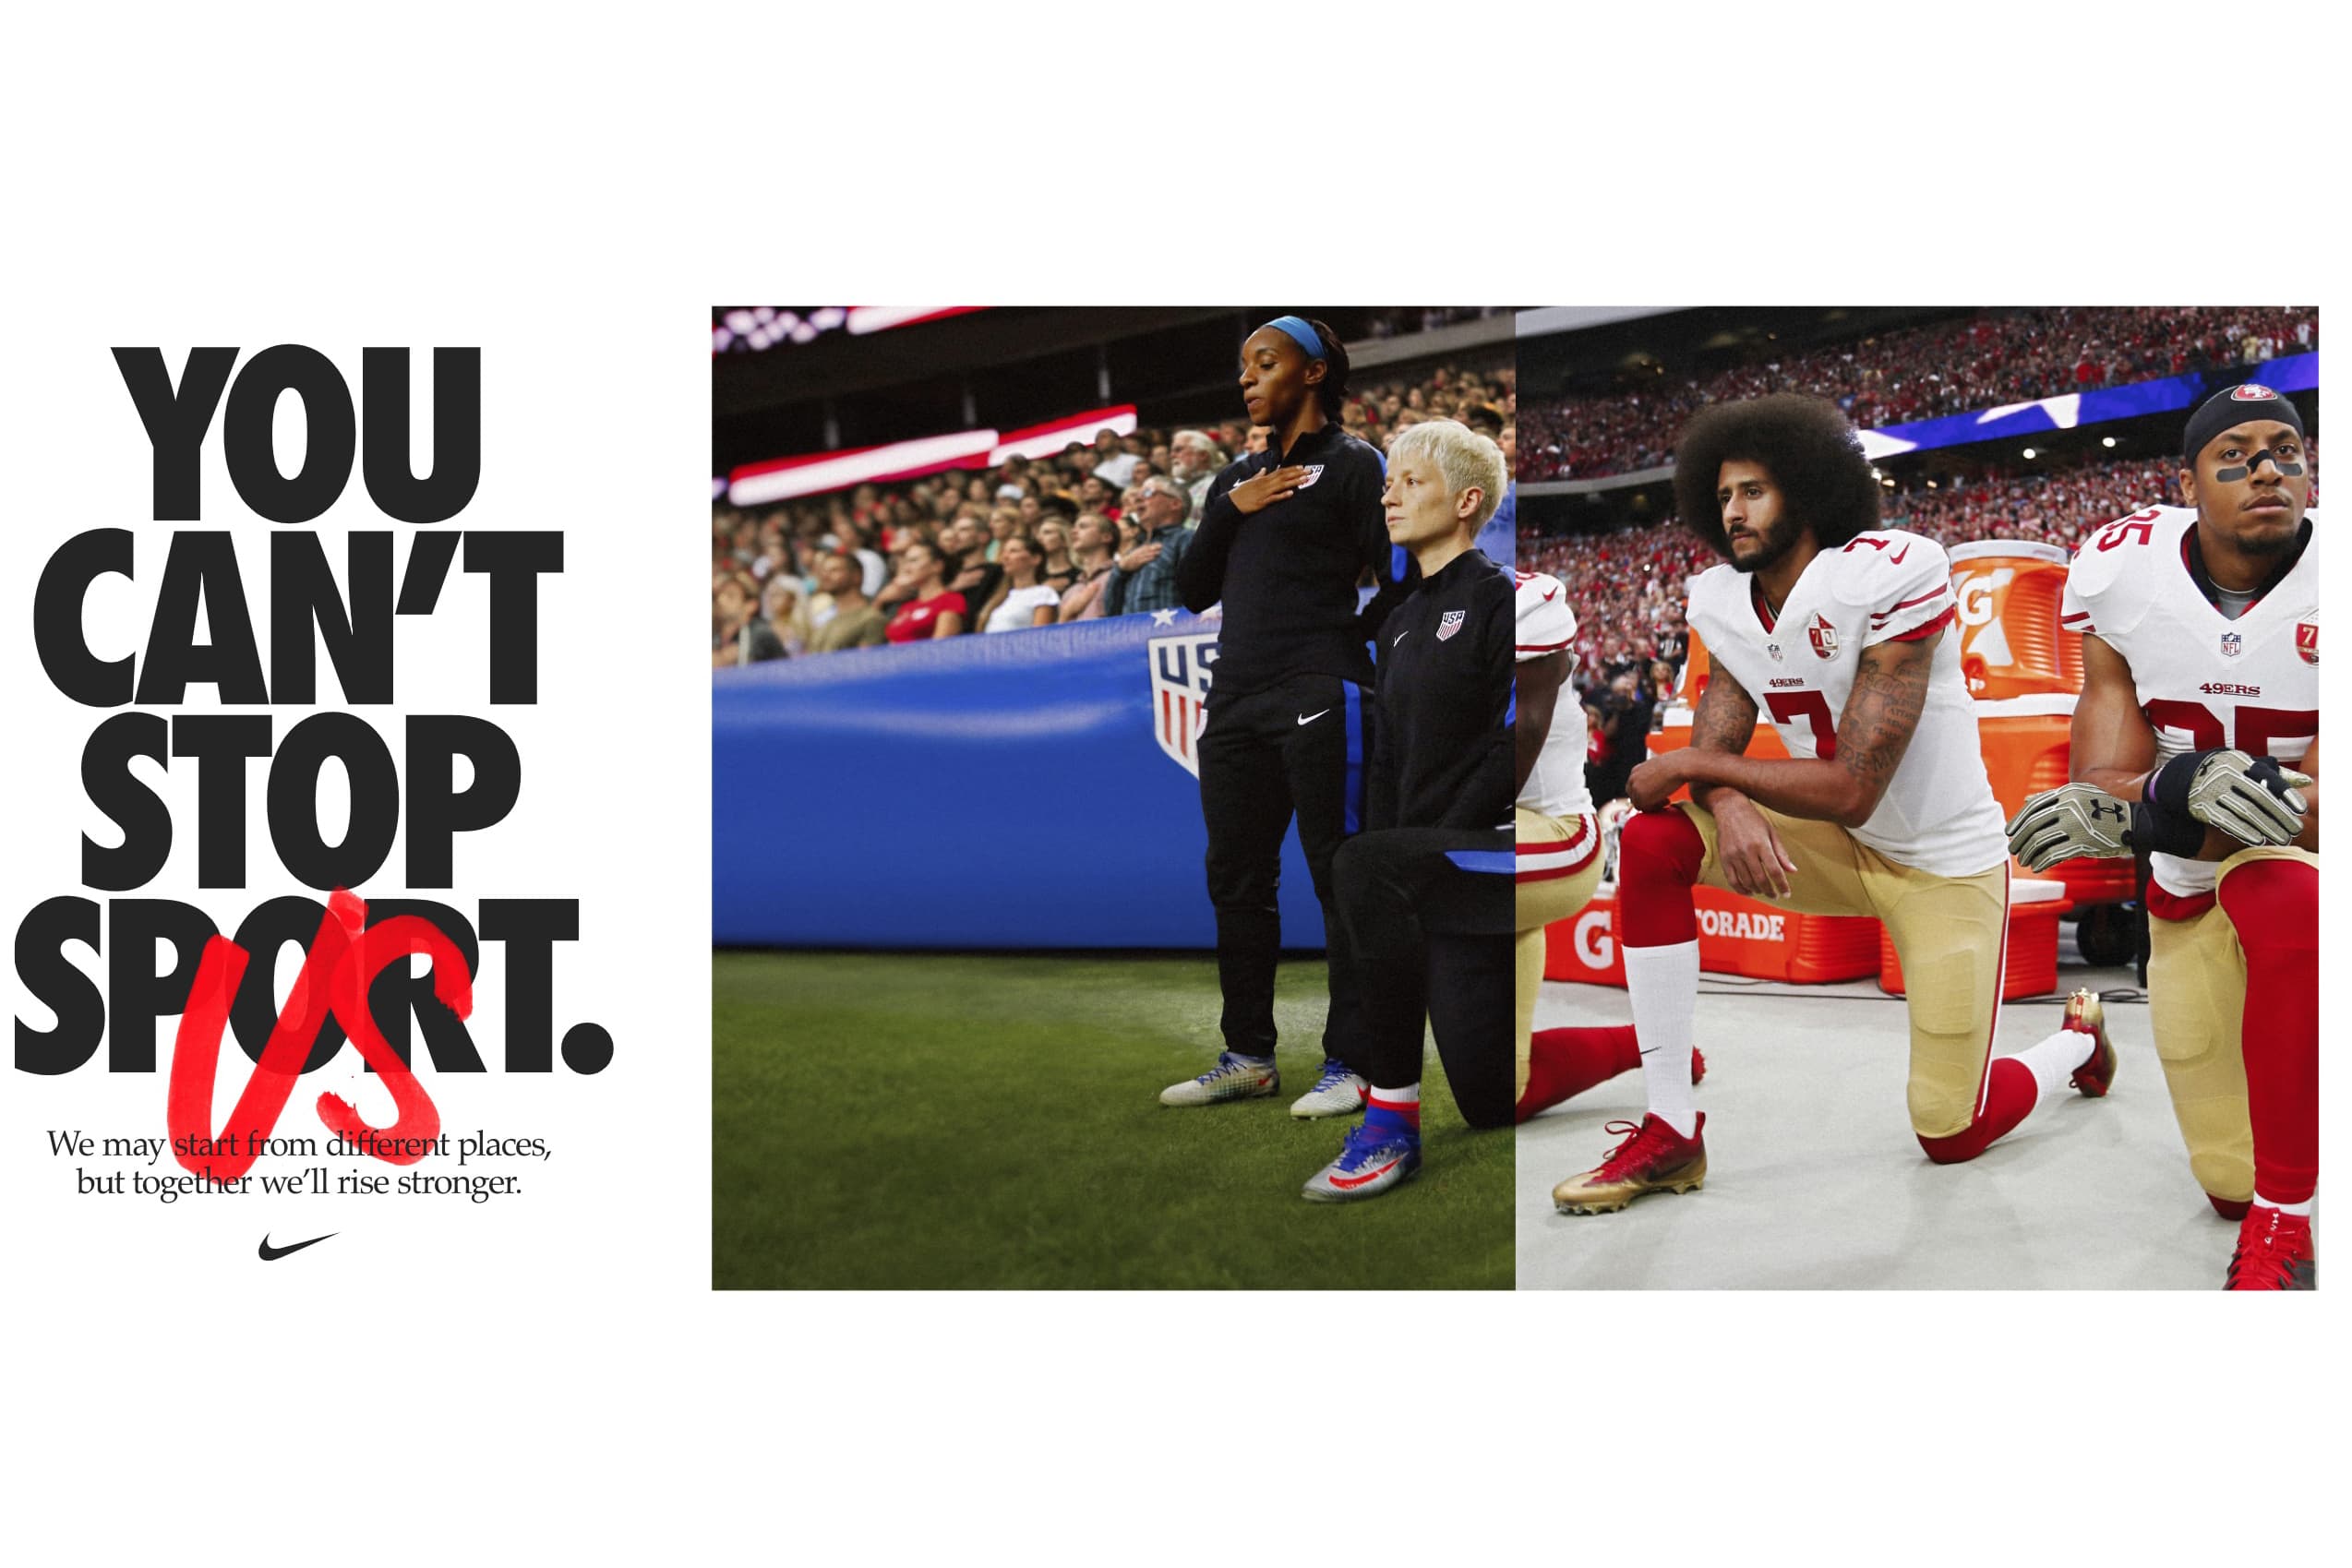 Megan Rapinoe speaks out about race and 